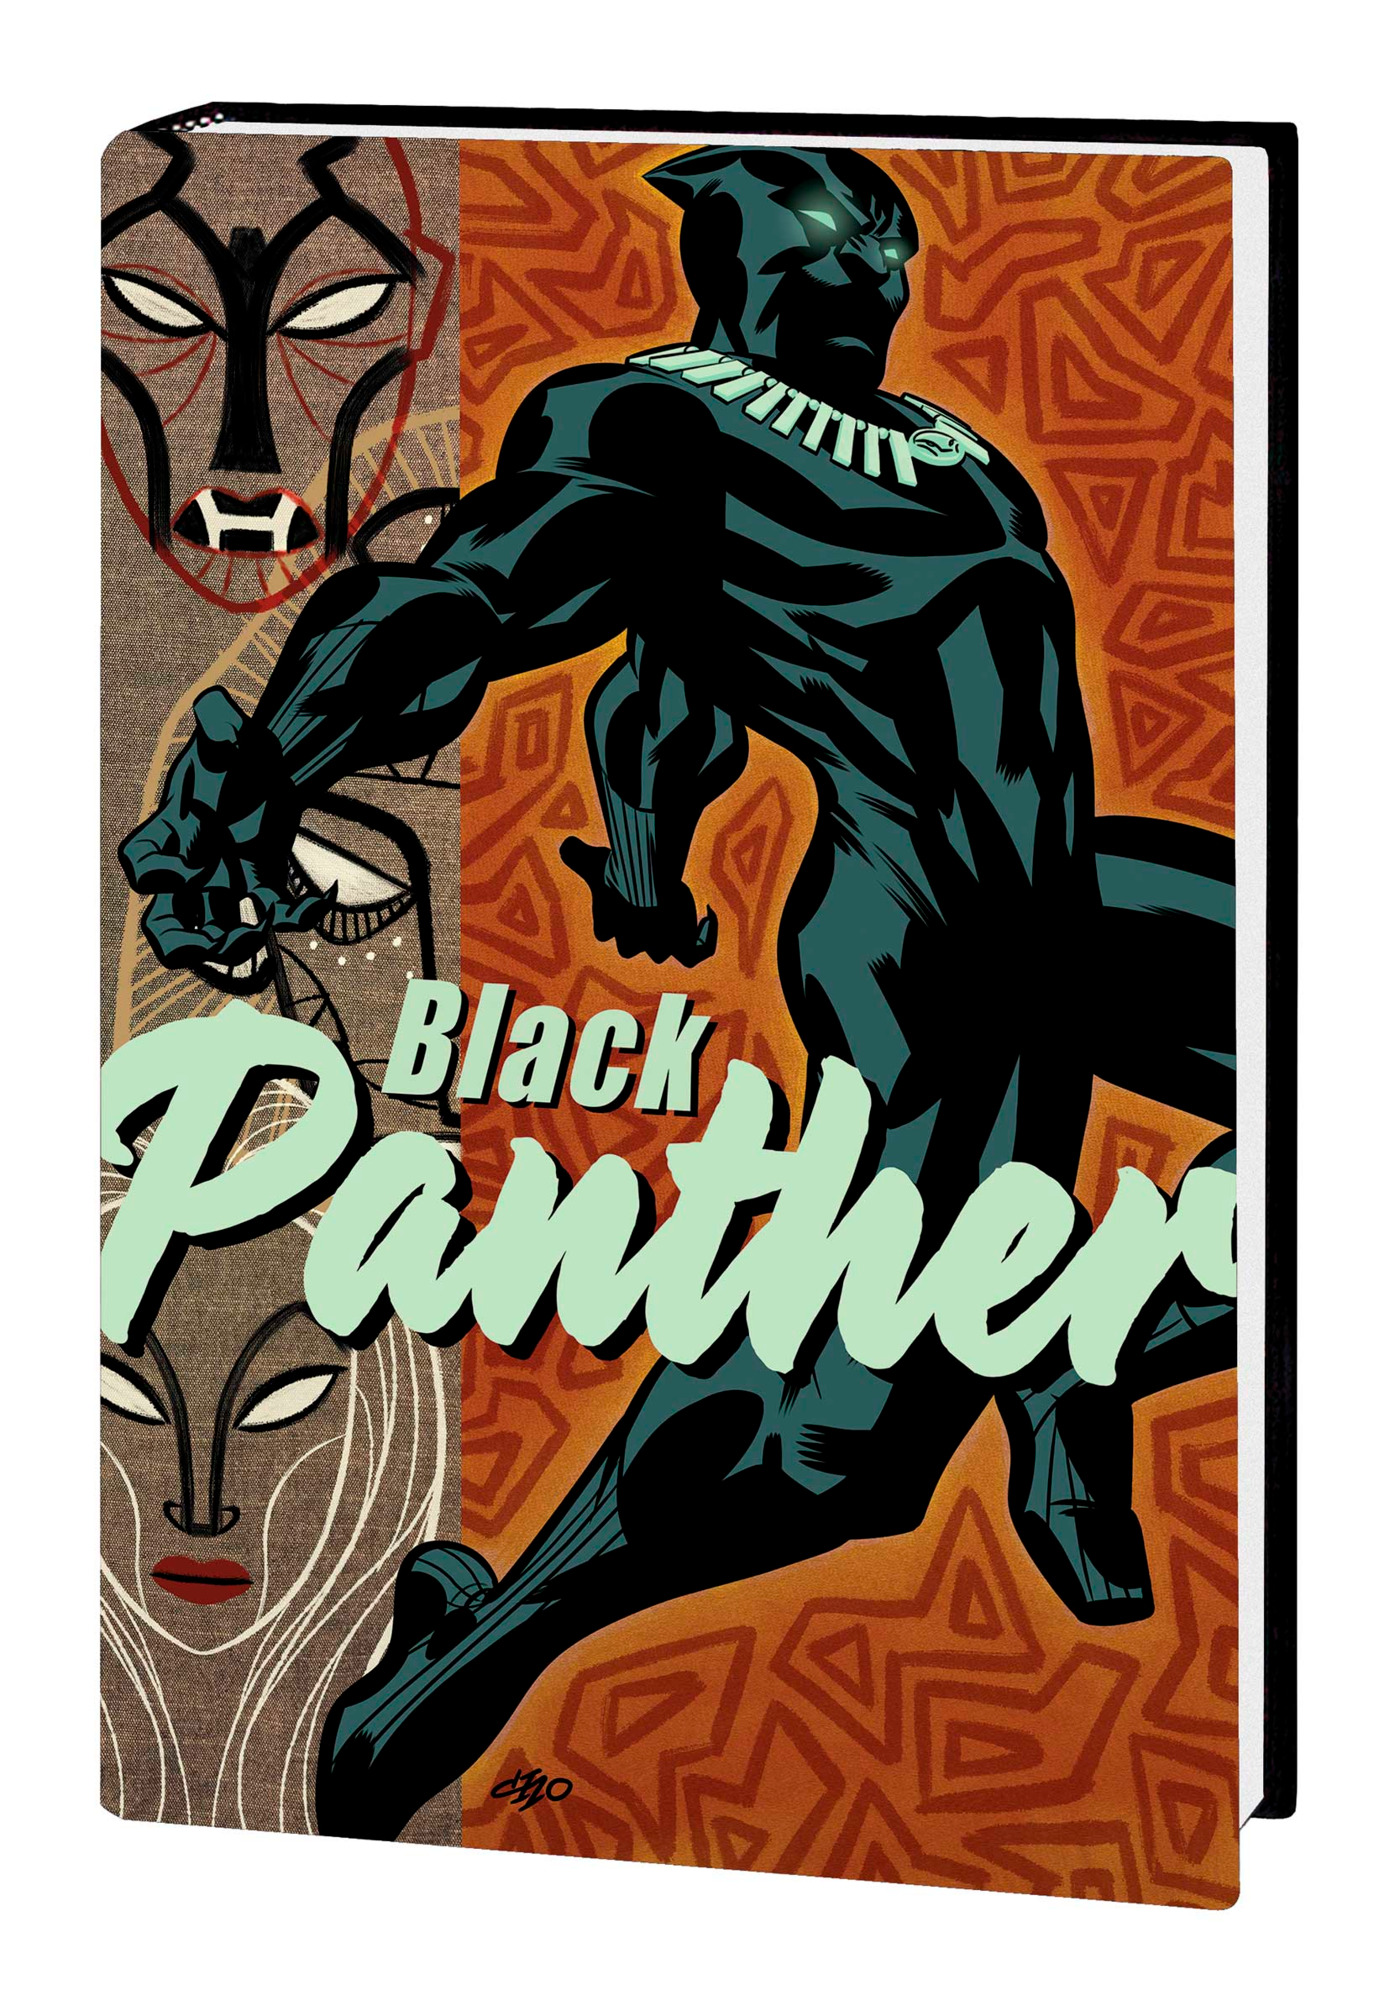 Black Panther by Ta-Nehisi Coates Omnibus Hardcover Direct Market Edition